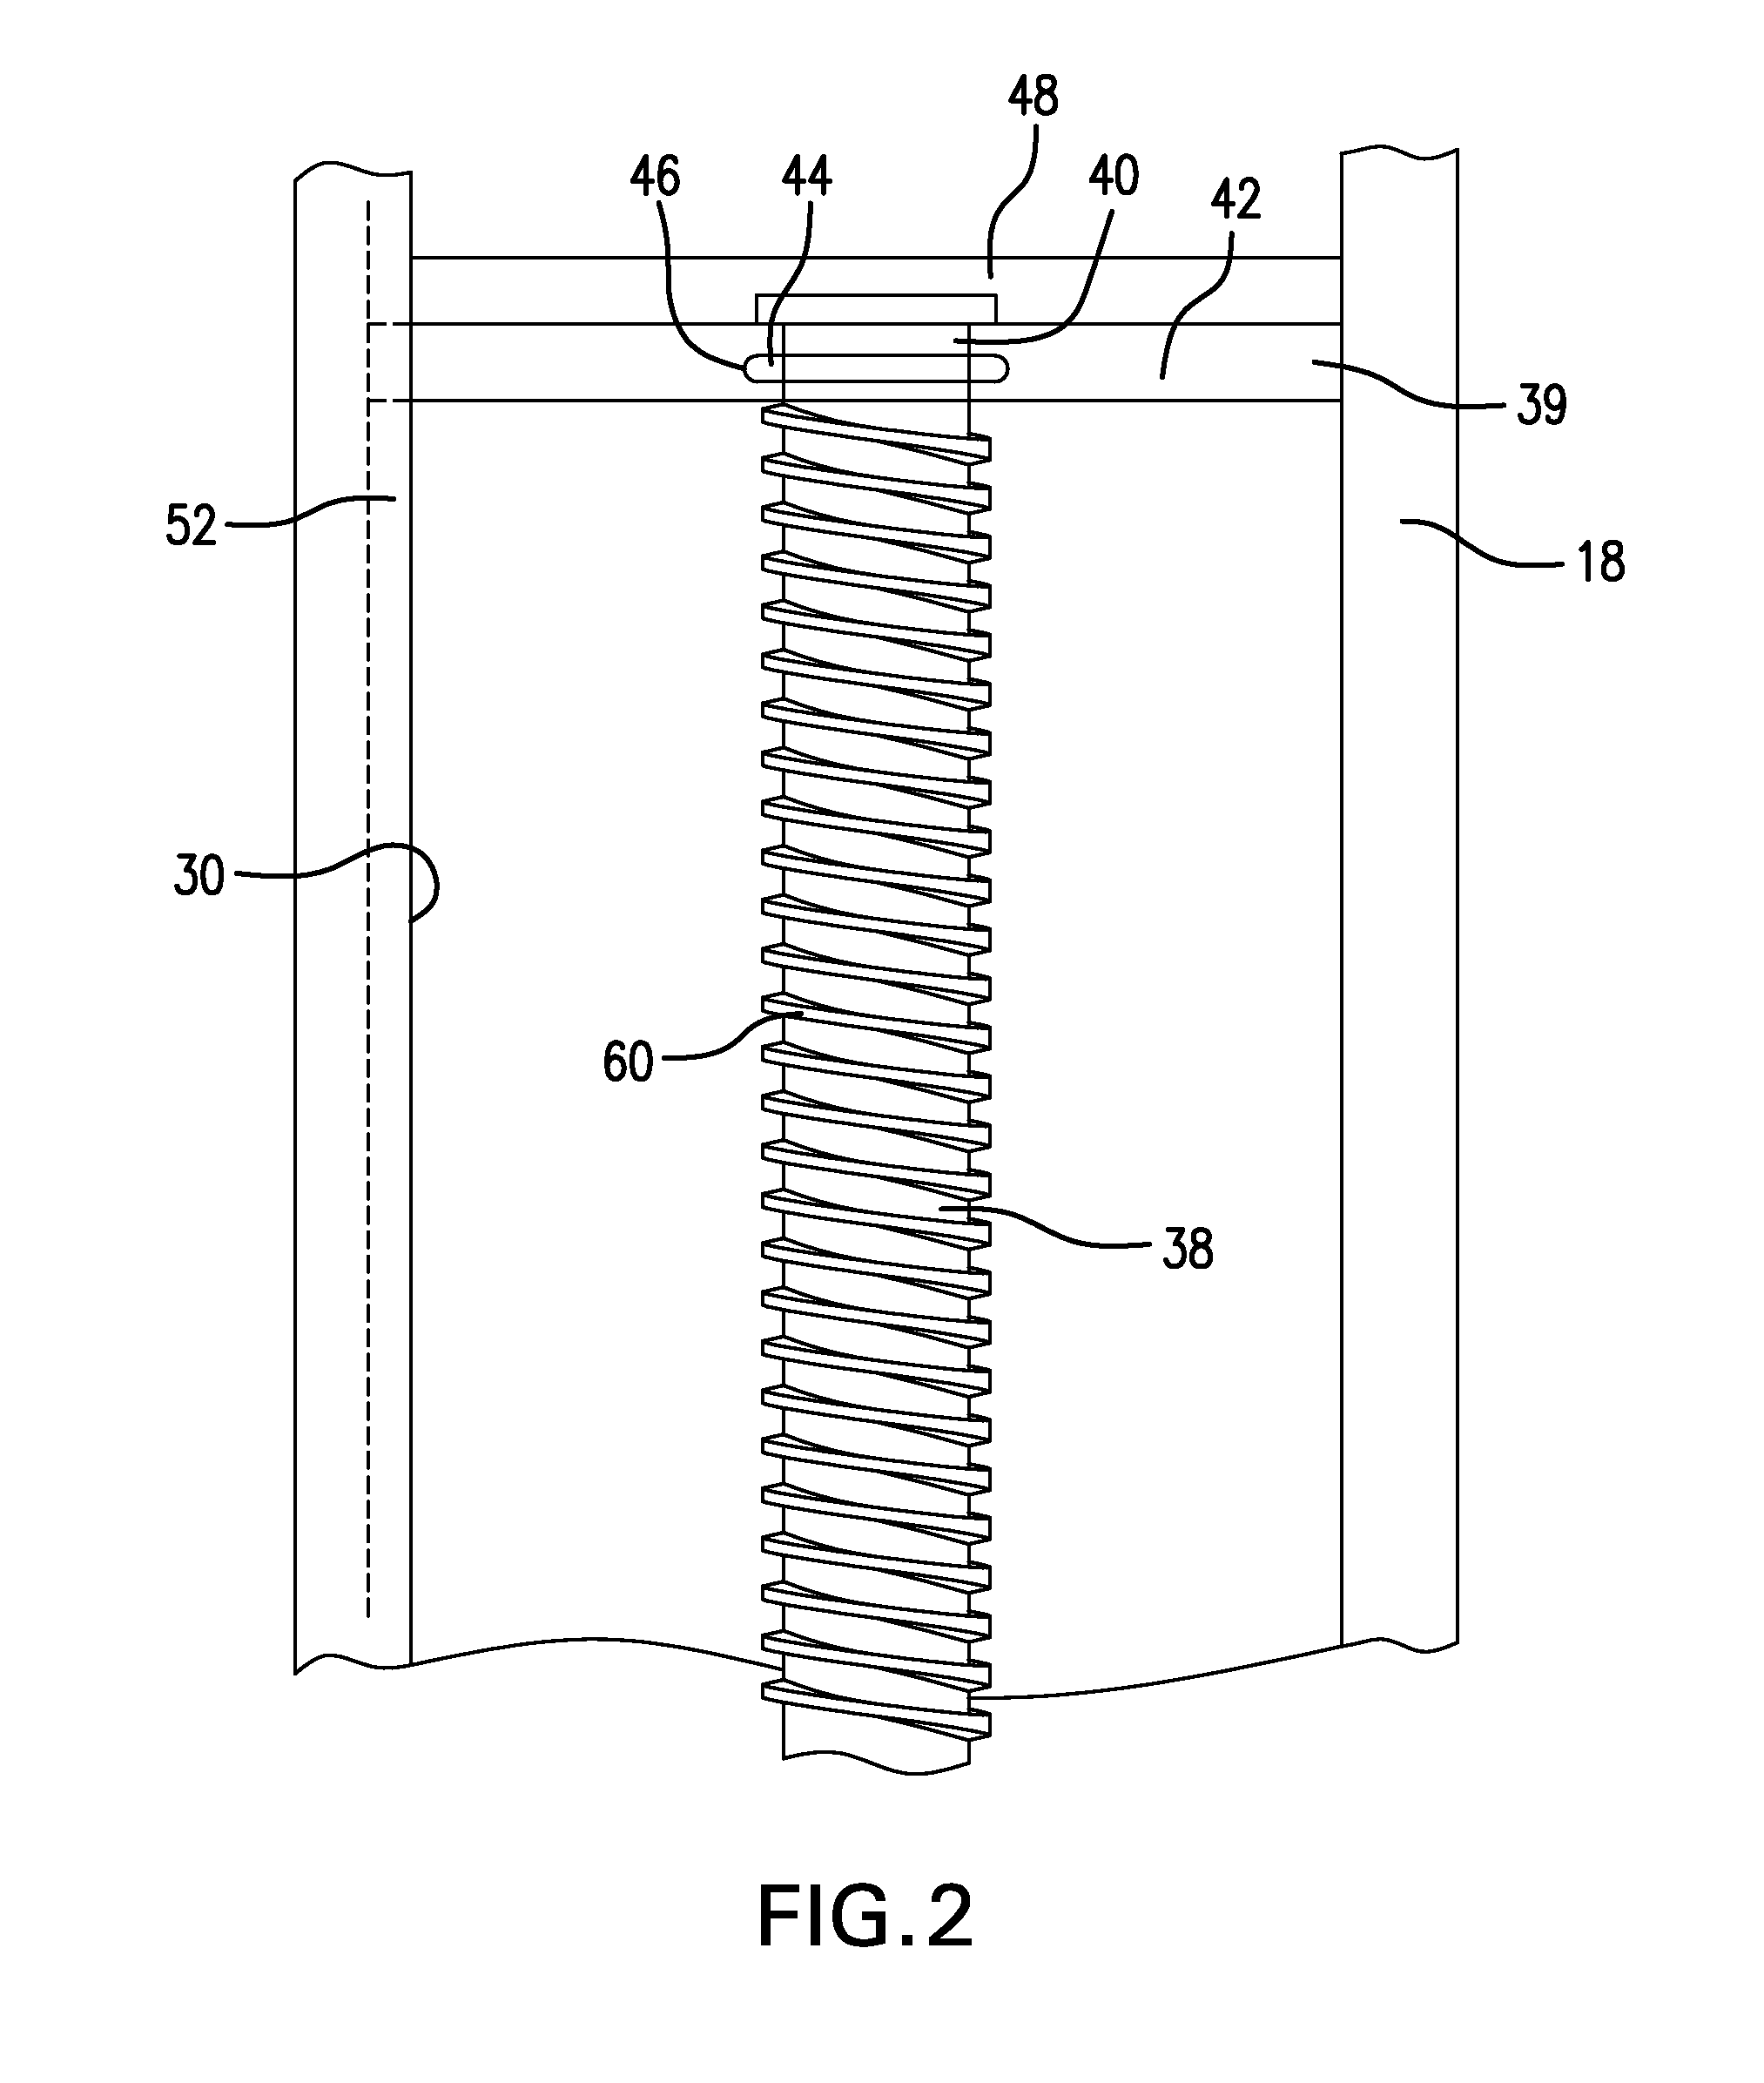 Fracturing pump assembly and method thereof